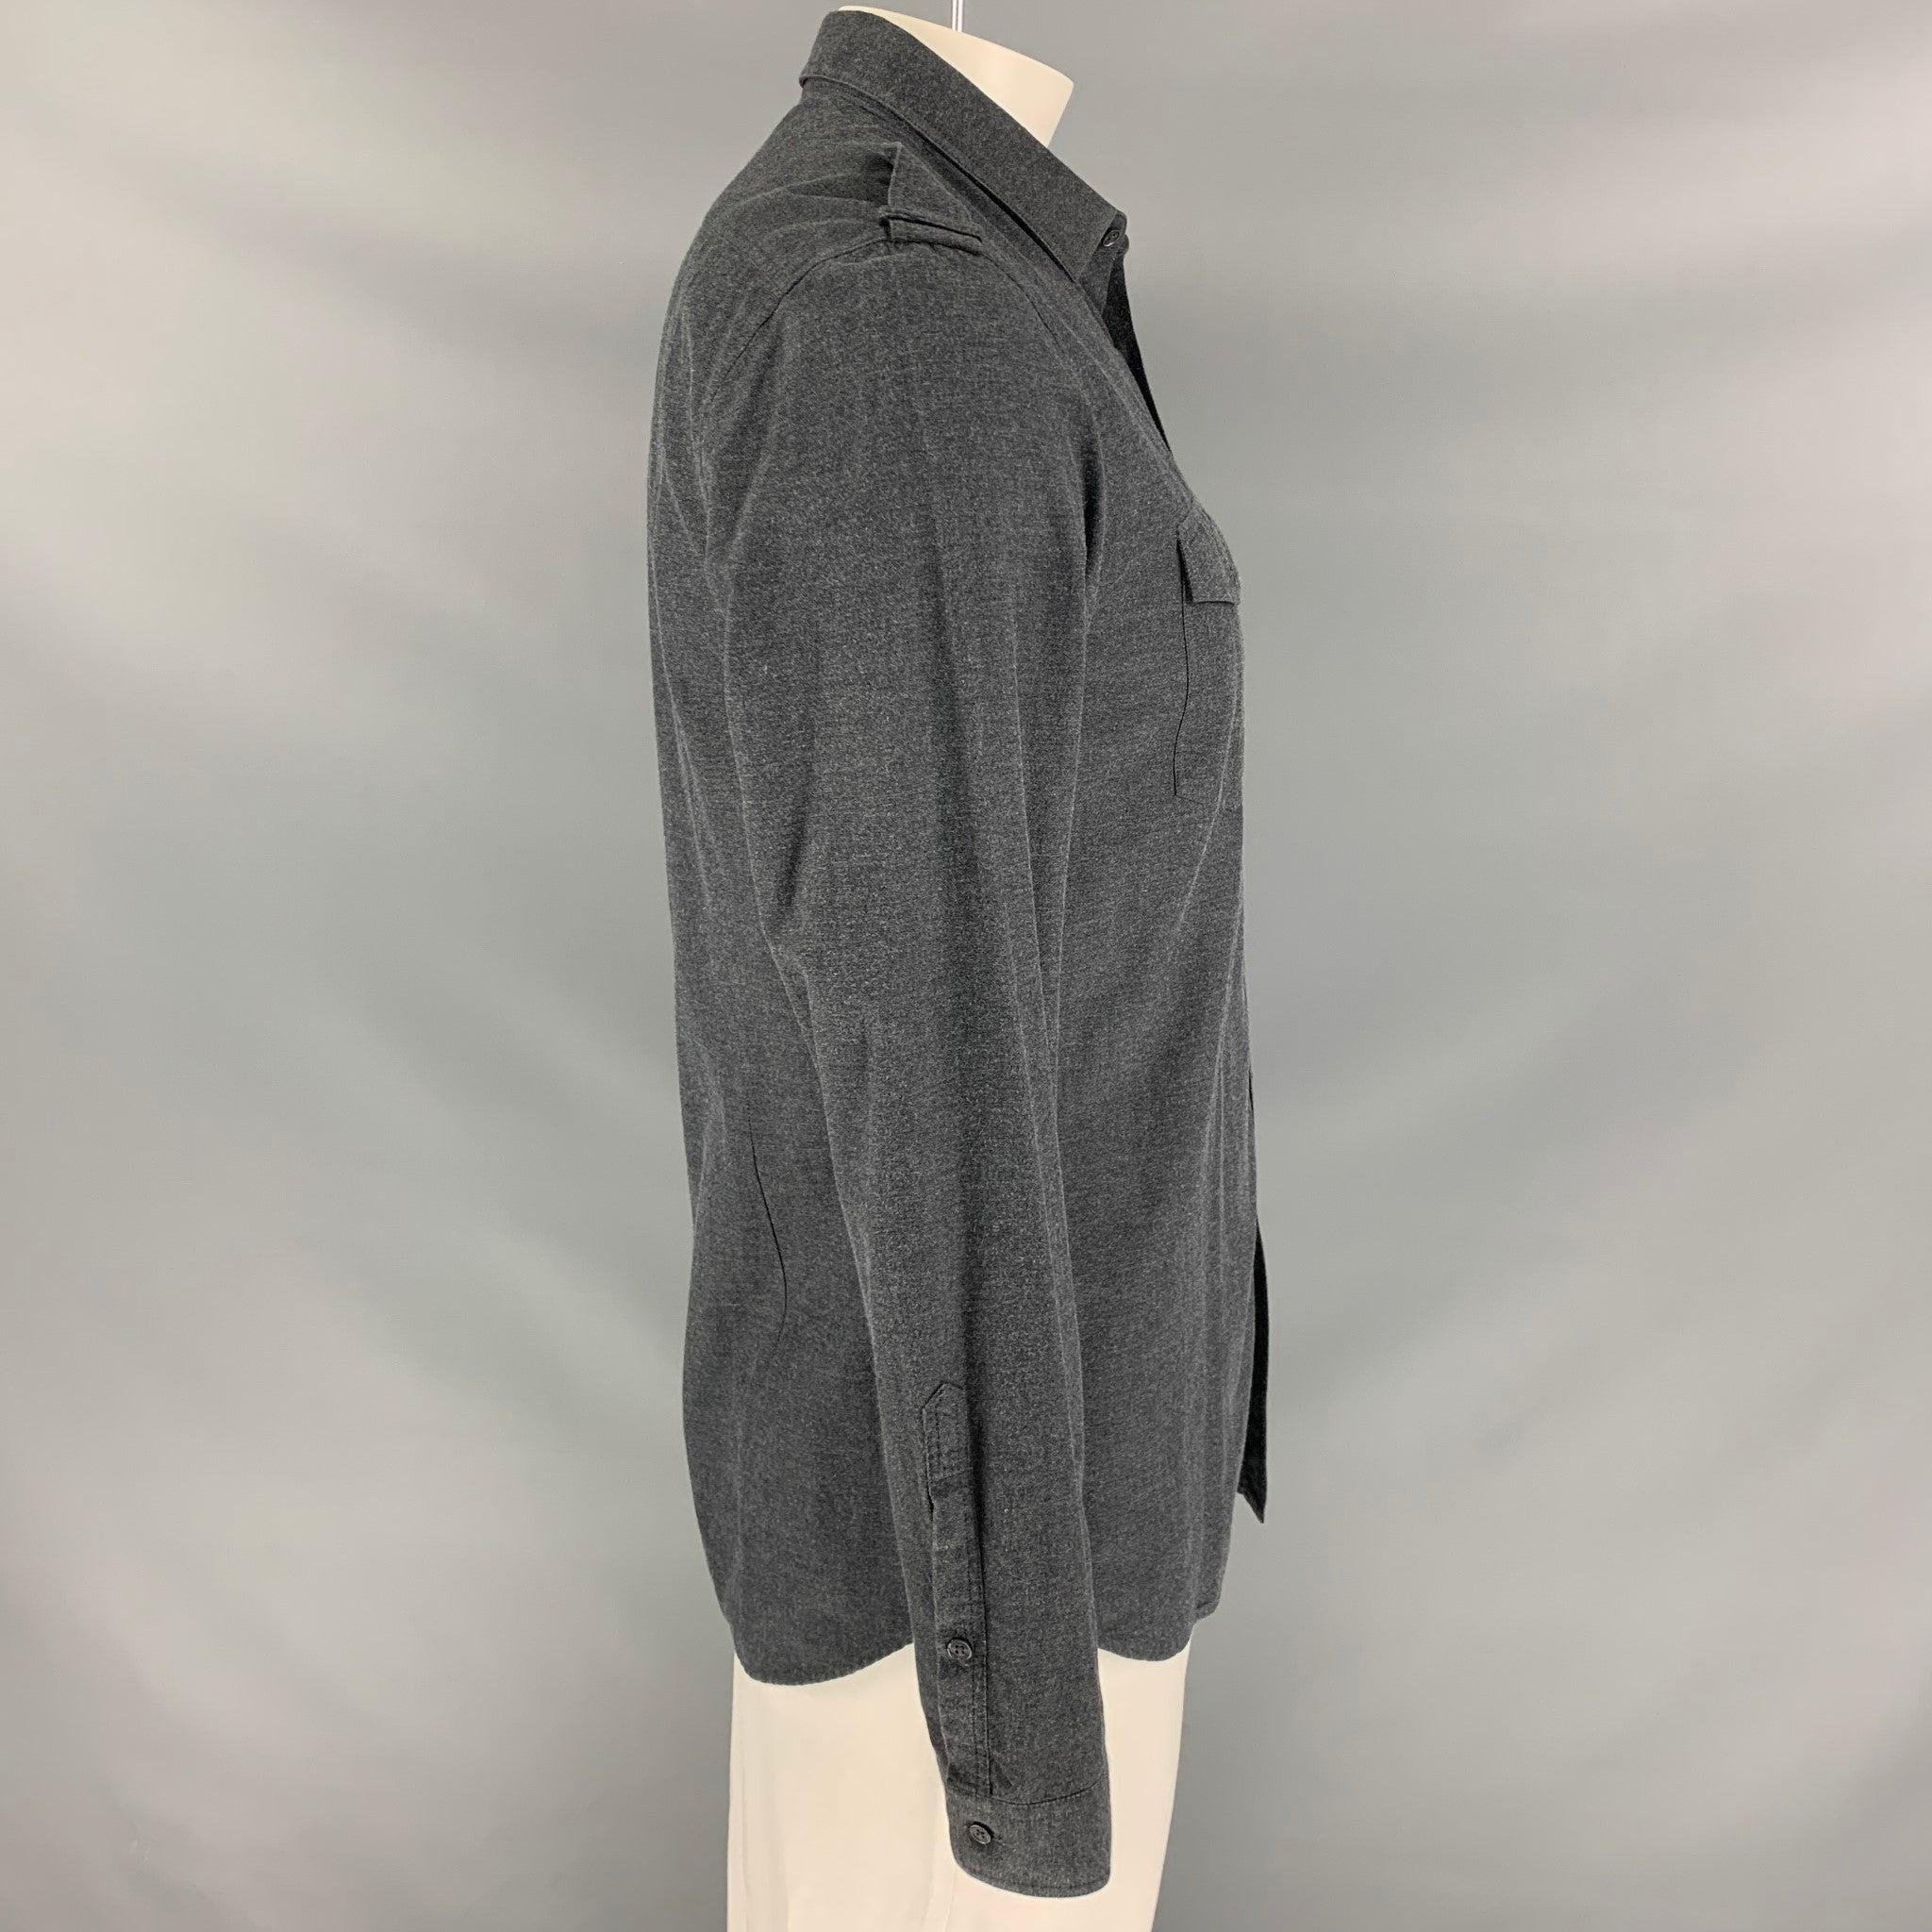 BURBERRY PRORSUM Fall 2010 long sleeve shirt comes in a gray cotton featuring epaulettes, front pockets, spread collar, and a buttoned closure. Made in Italy.Very Good
Pre-Owned Condition. 

Marked:   18.5/42 

Measurements: 
 
Shoulder: 18.5 inches